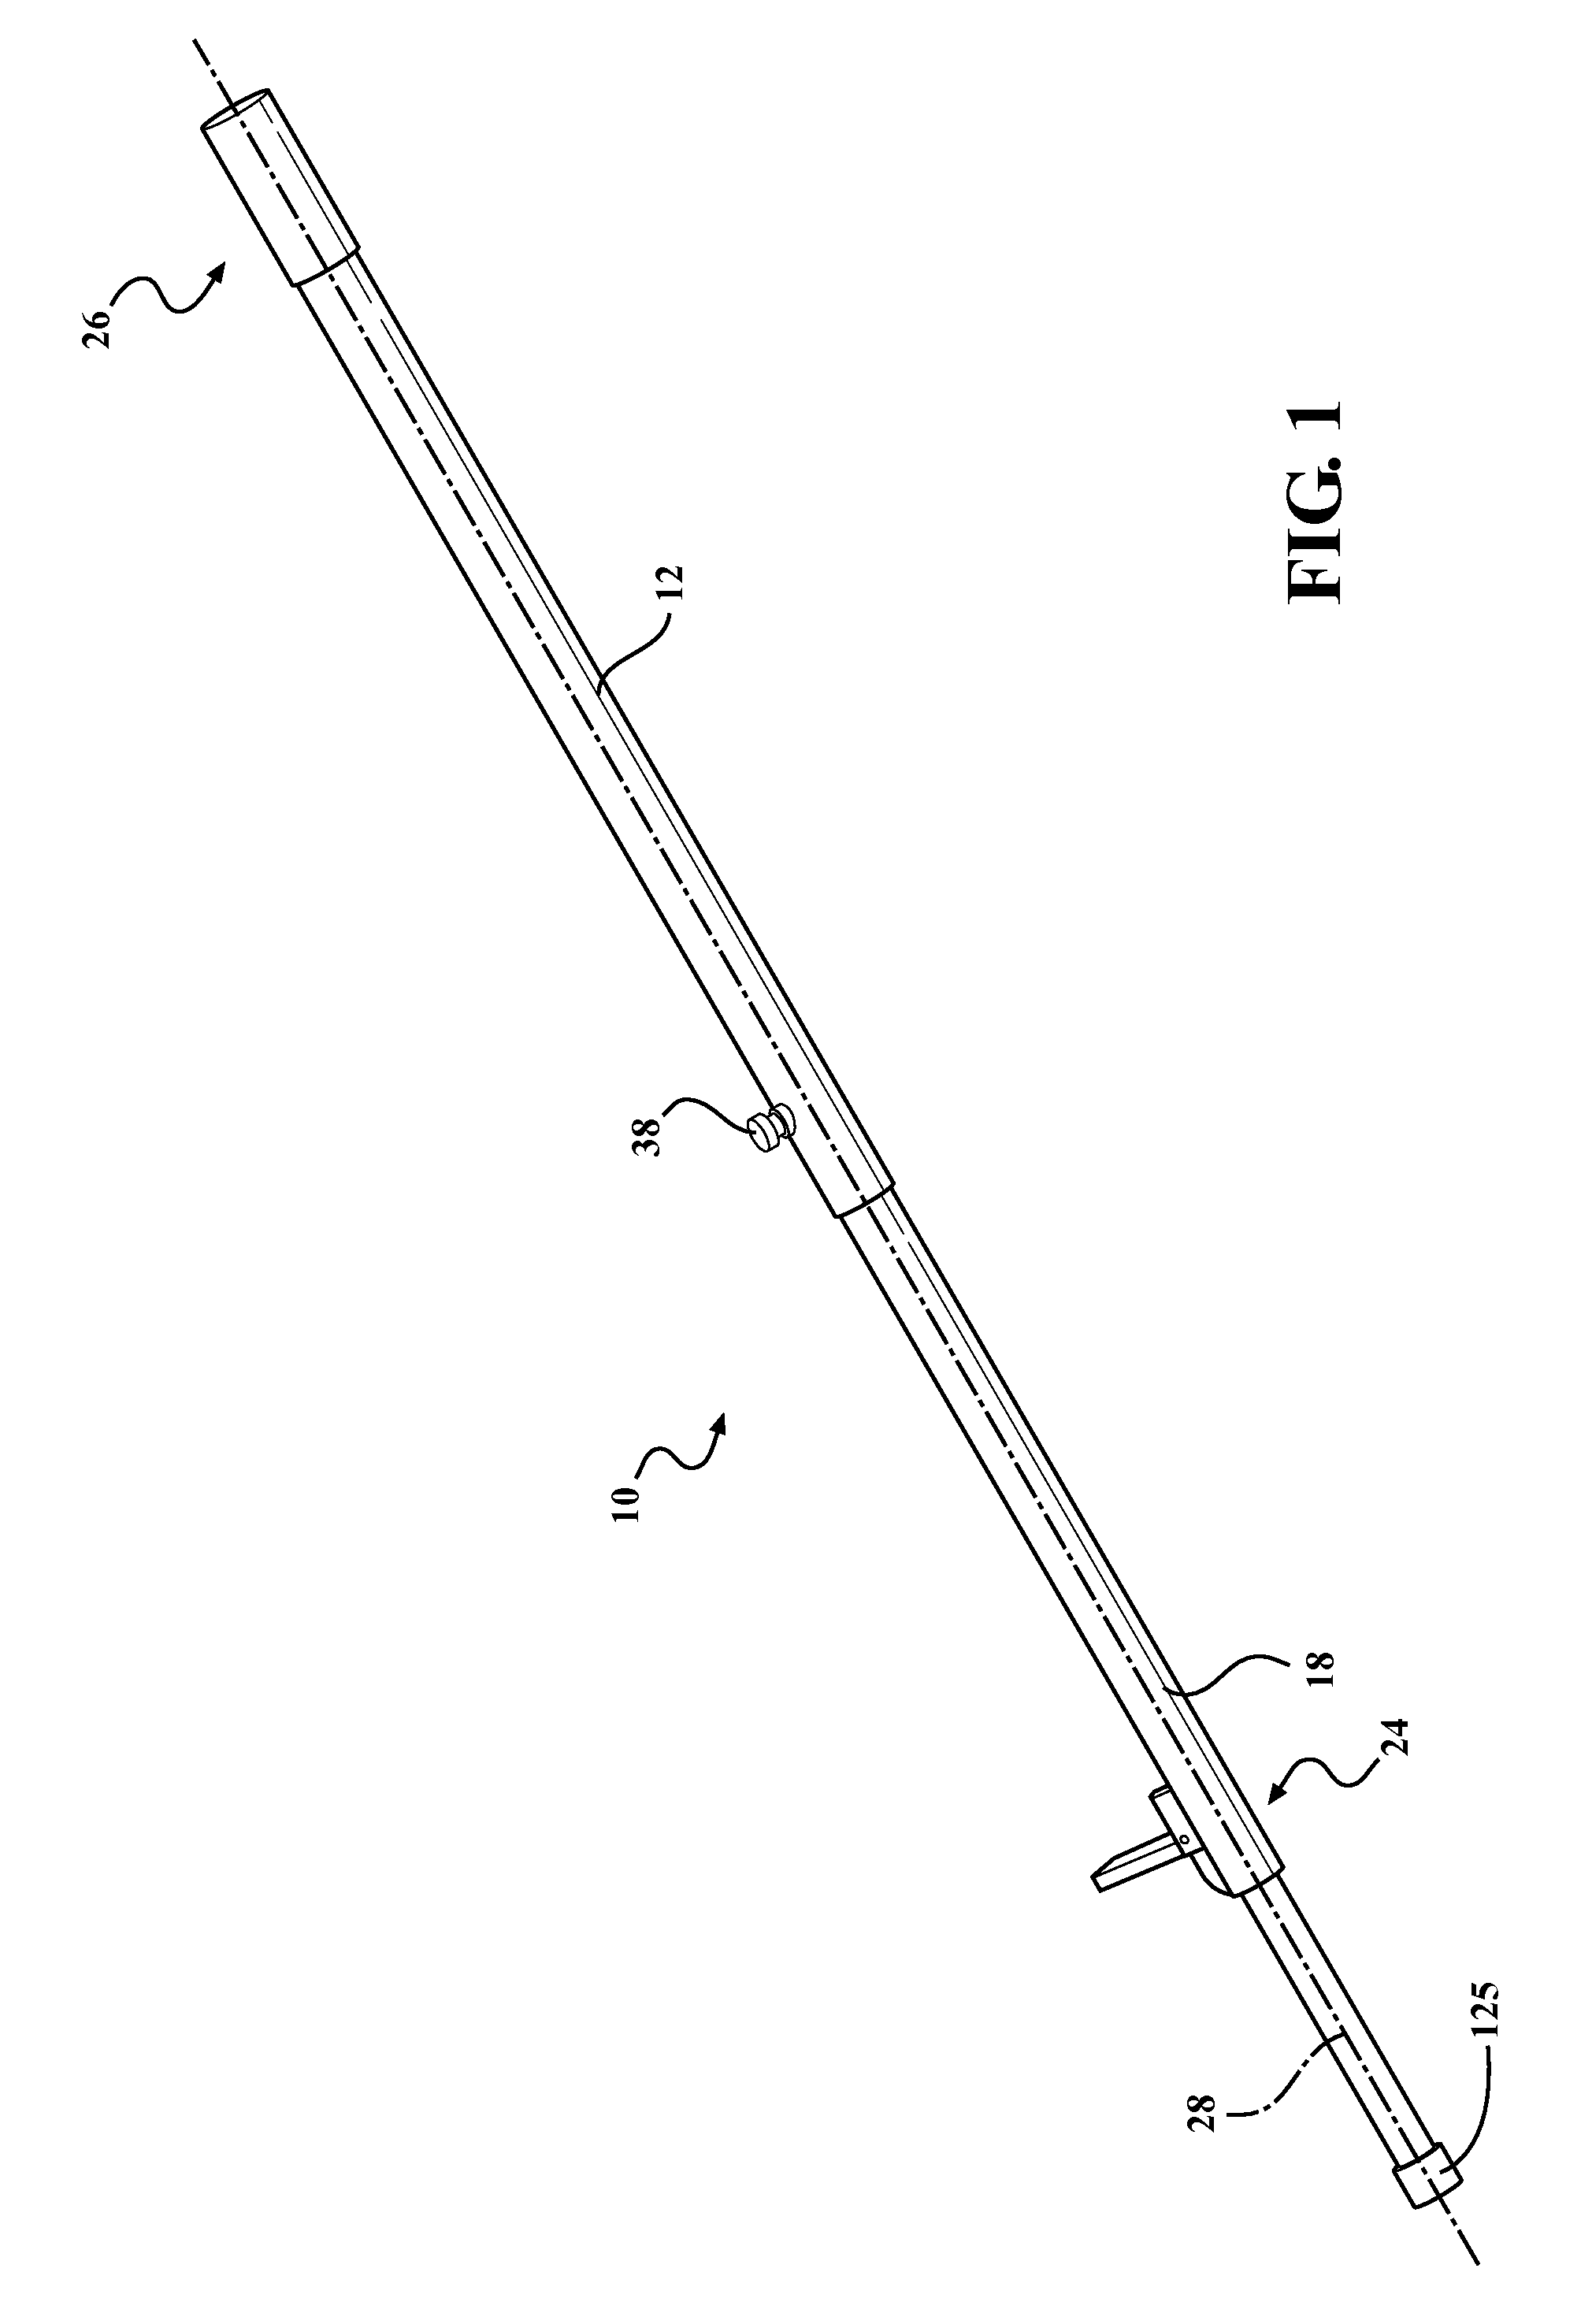 Impact tool assembly and method of assembling same